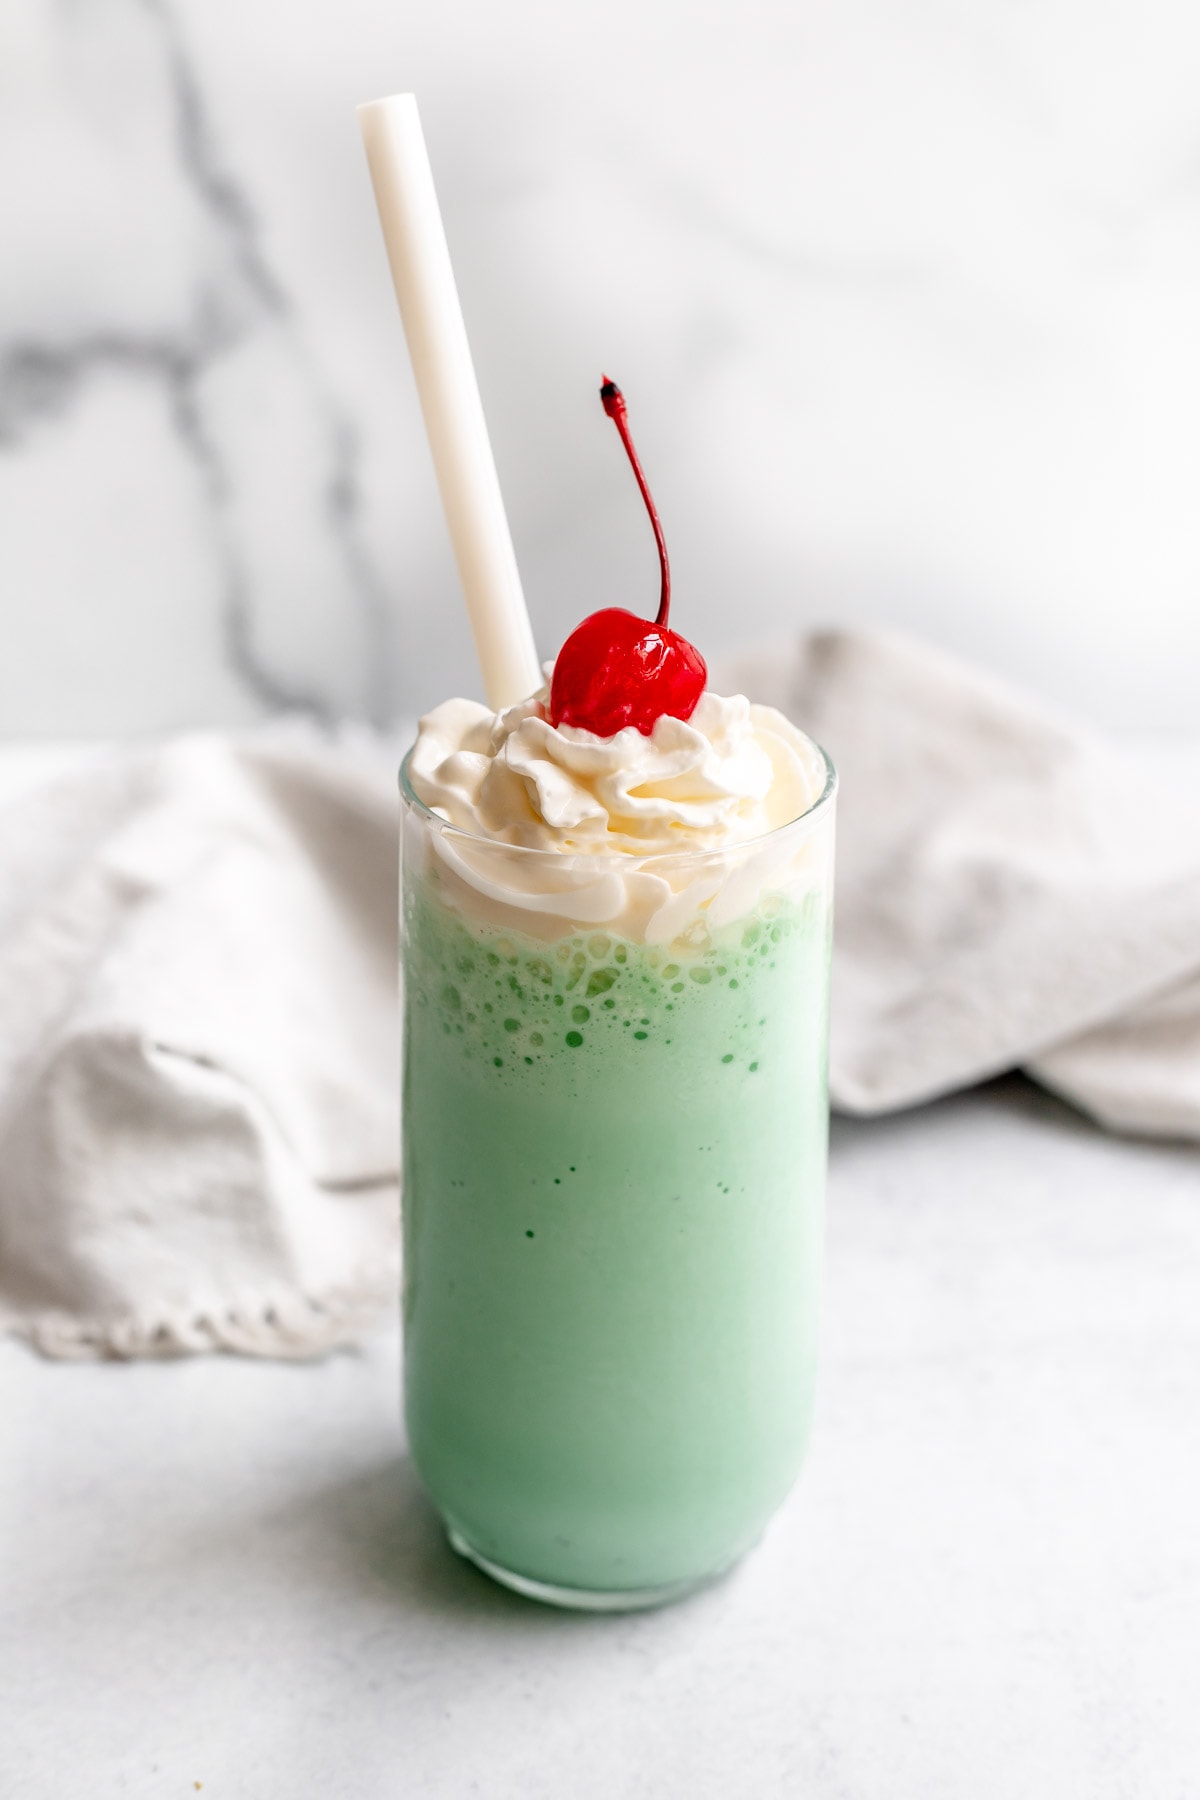 Glass with green shamrock shake topped with whipped cream, a cherry, and a straw